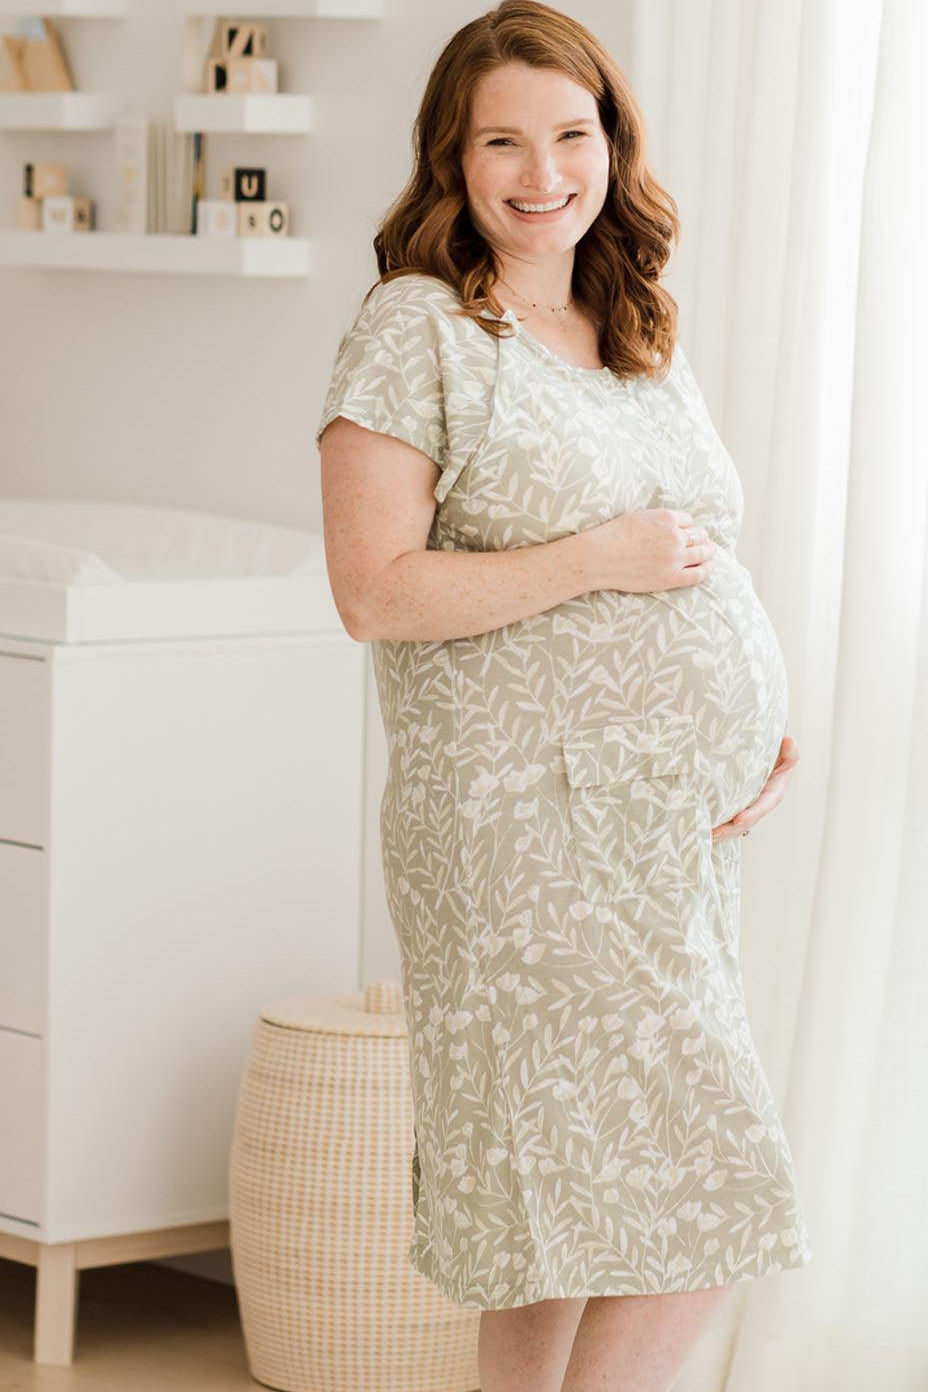 Modern Polka Dot Labor & Delivery Gown